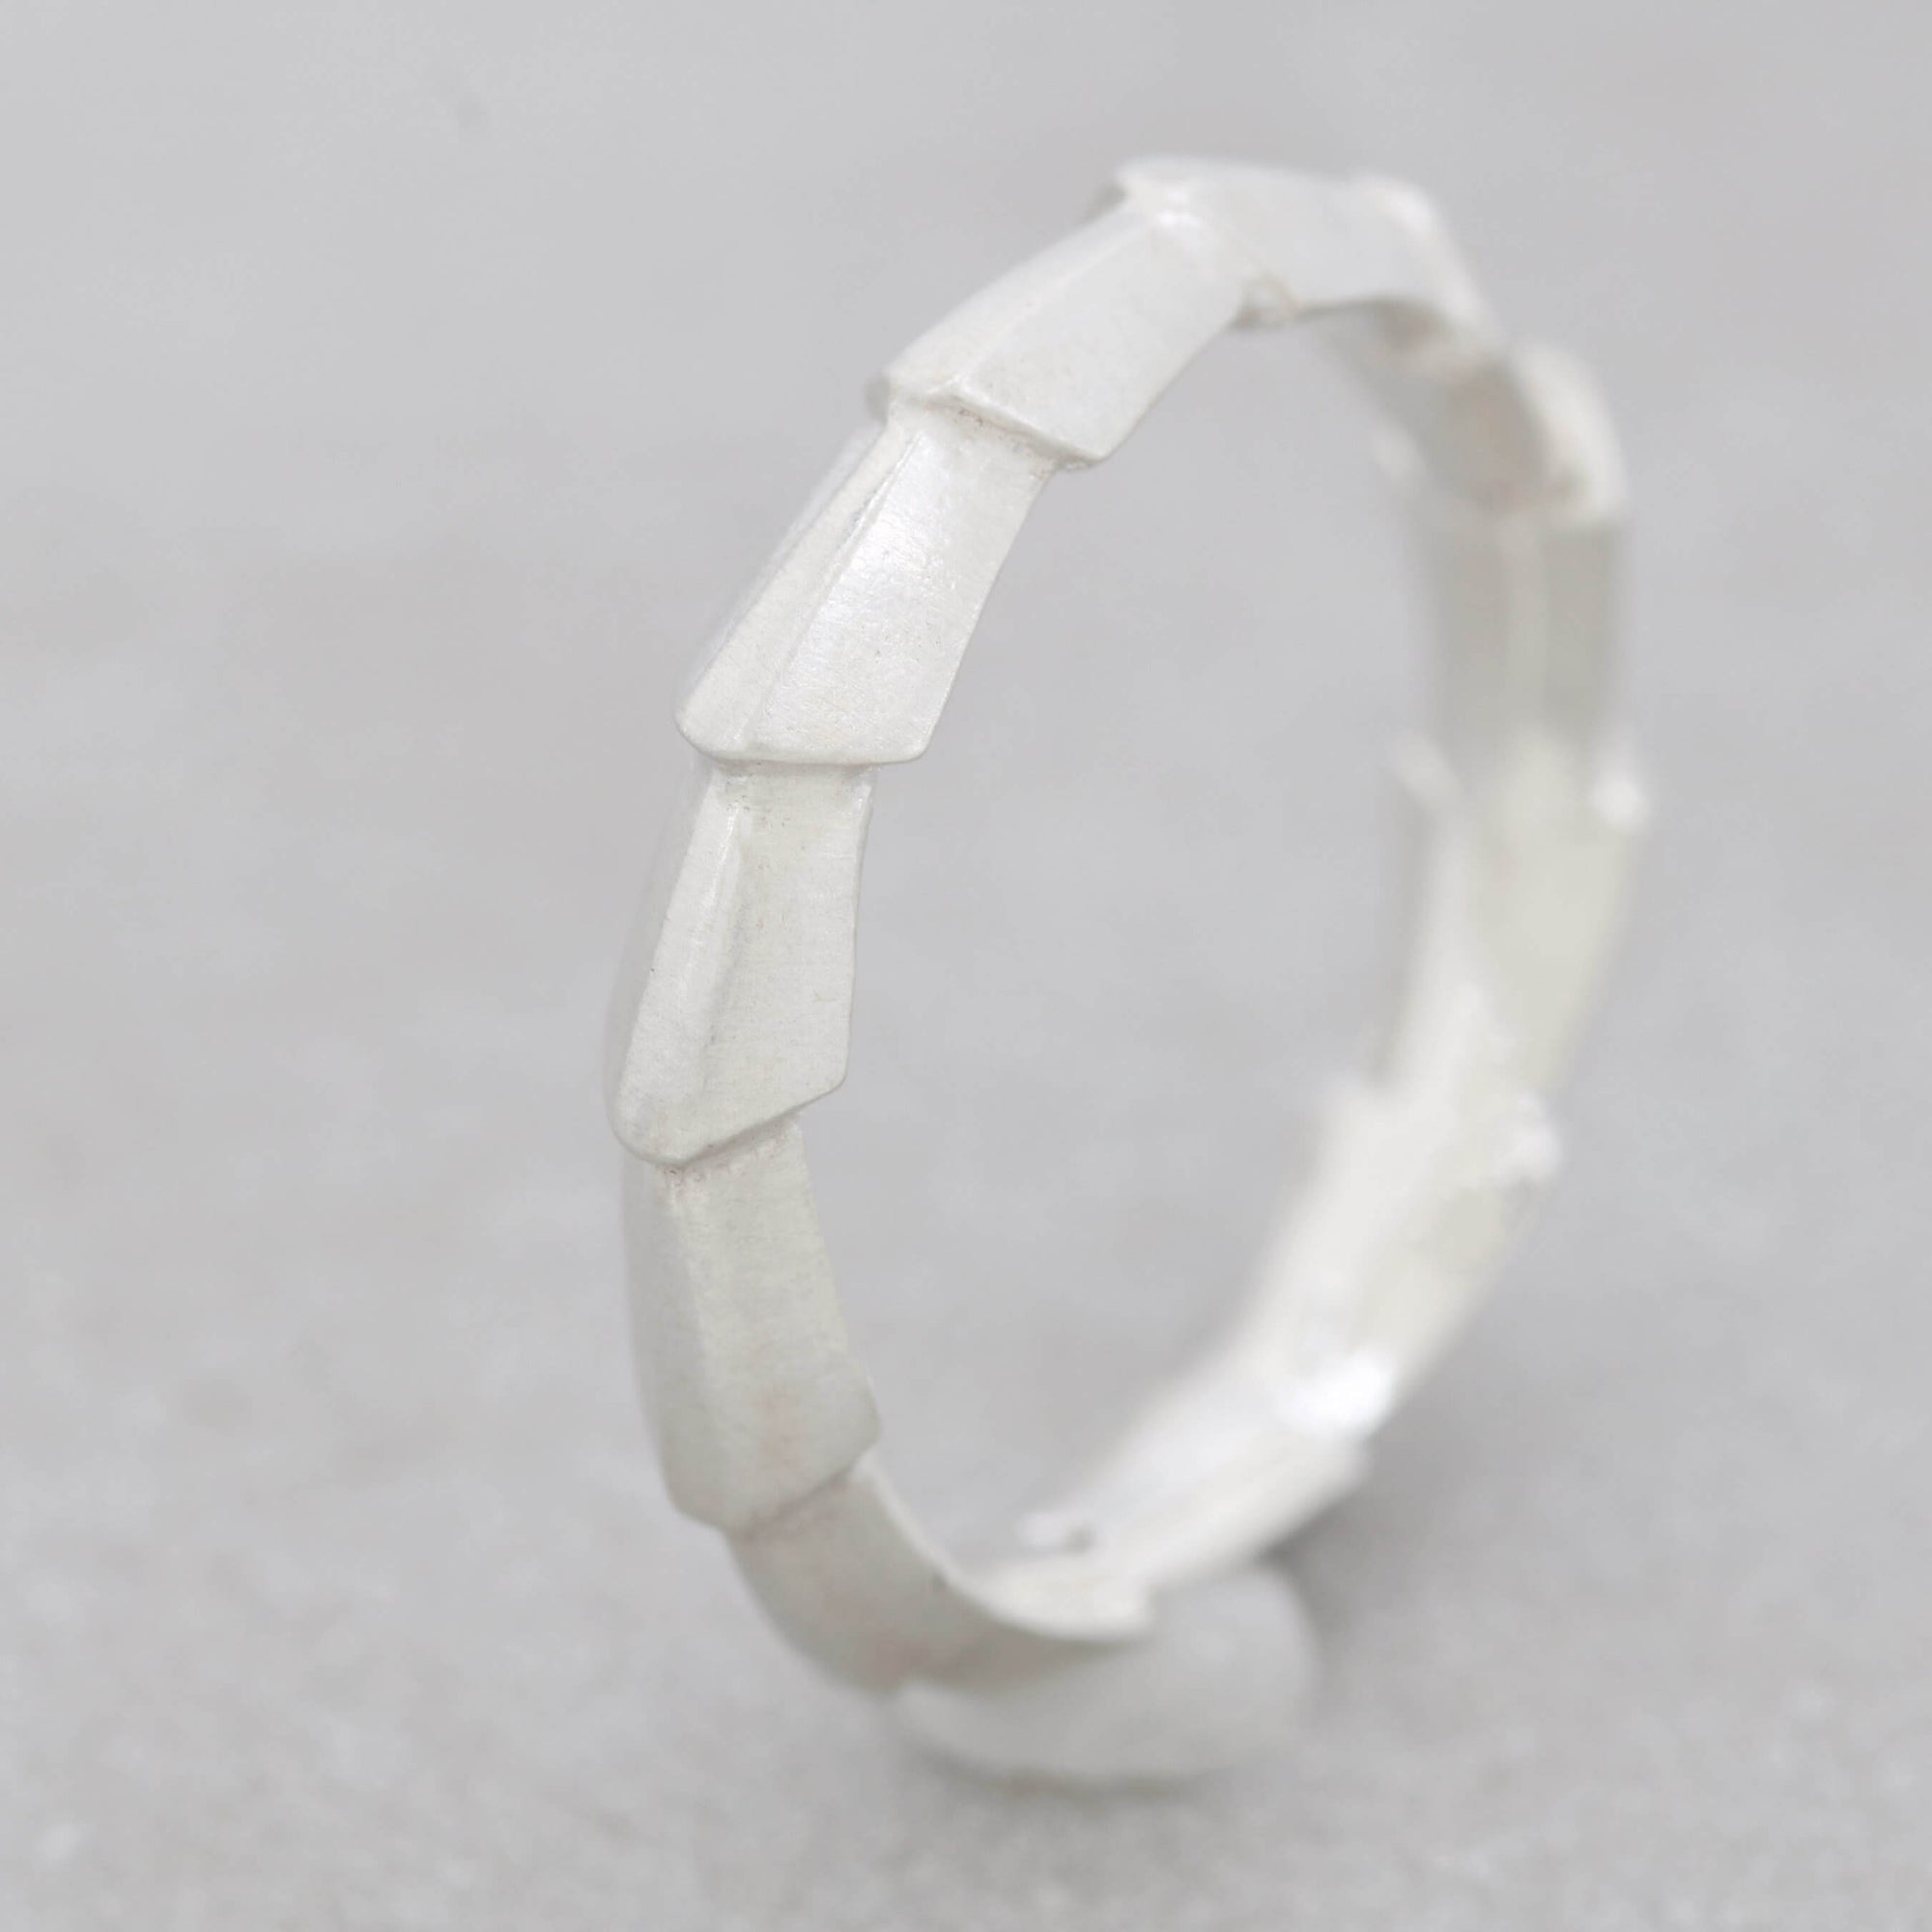 Deco Flow Ring - Sterling silver geometric band ring